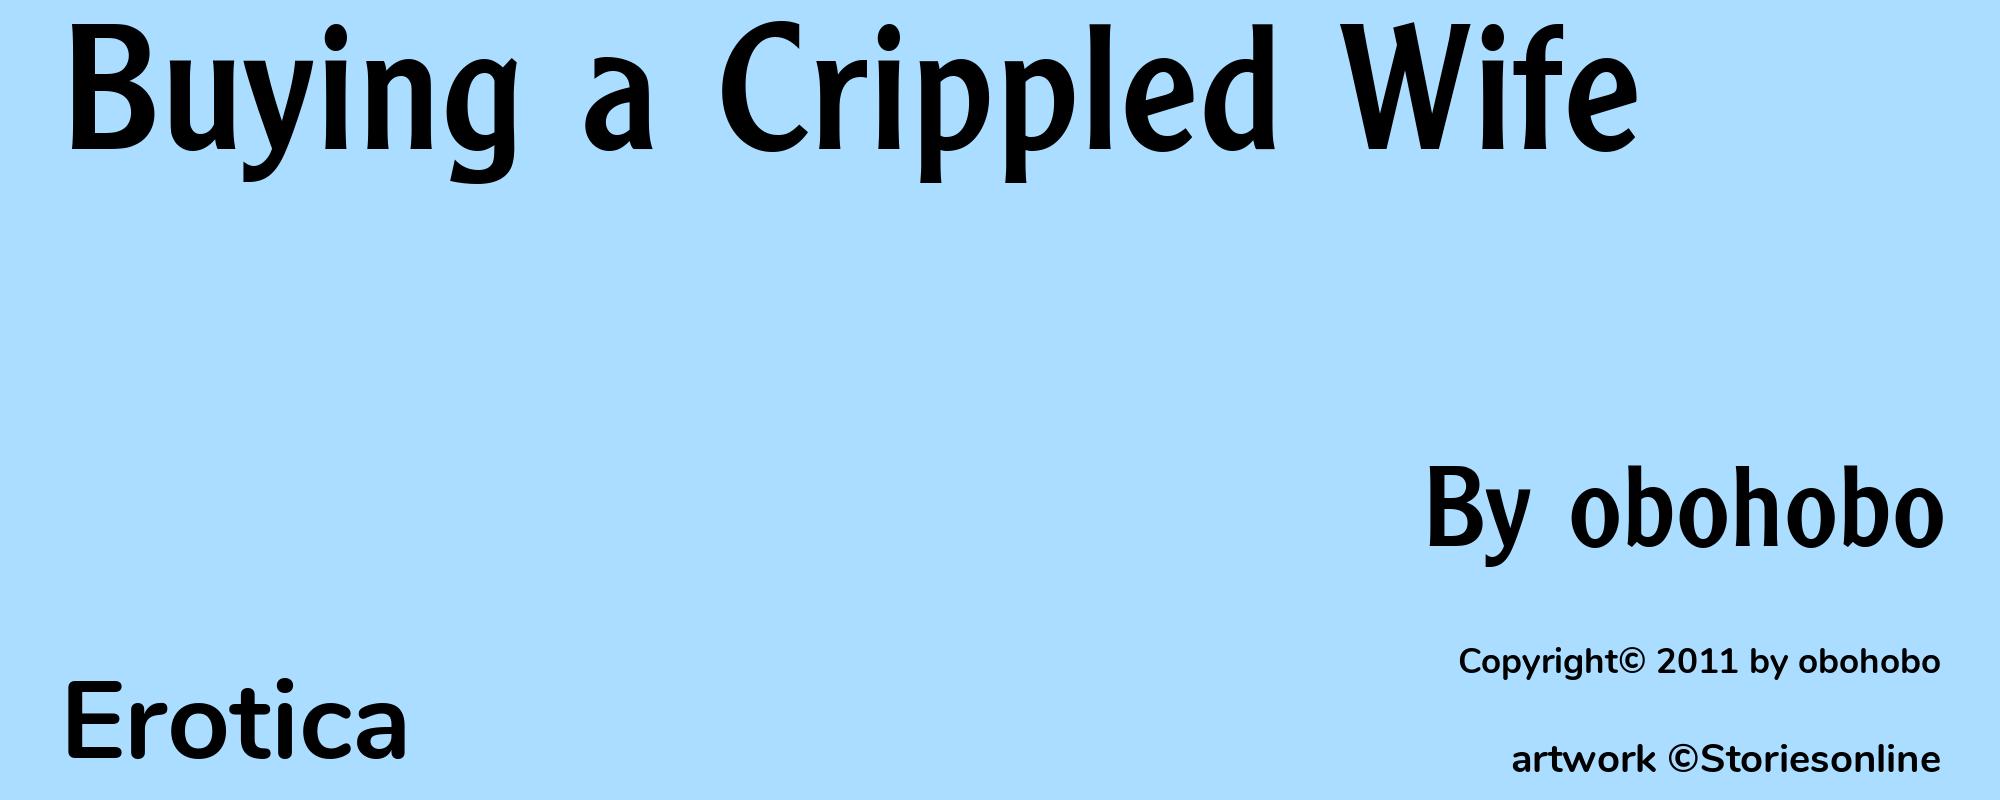 Buying a Crippled Wife - Cover